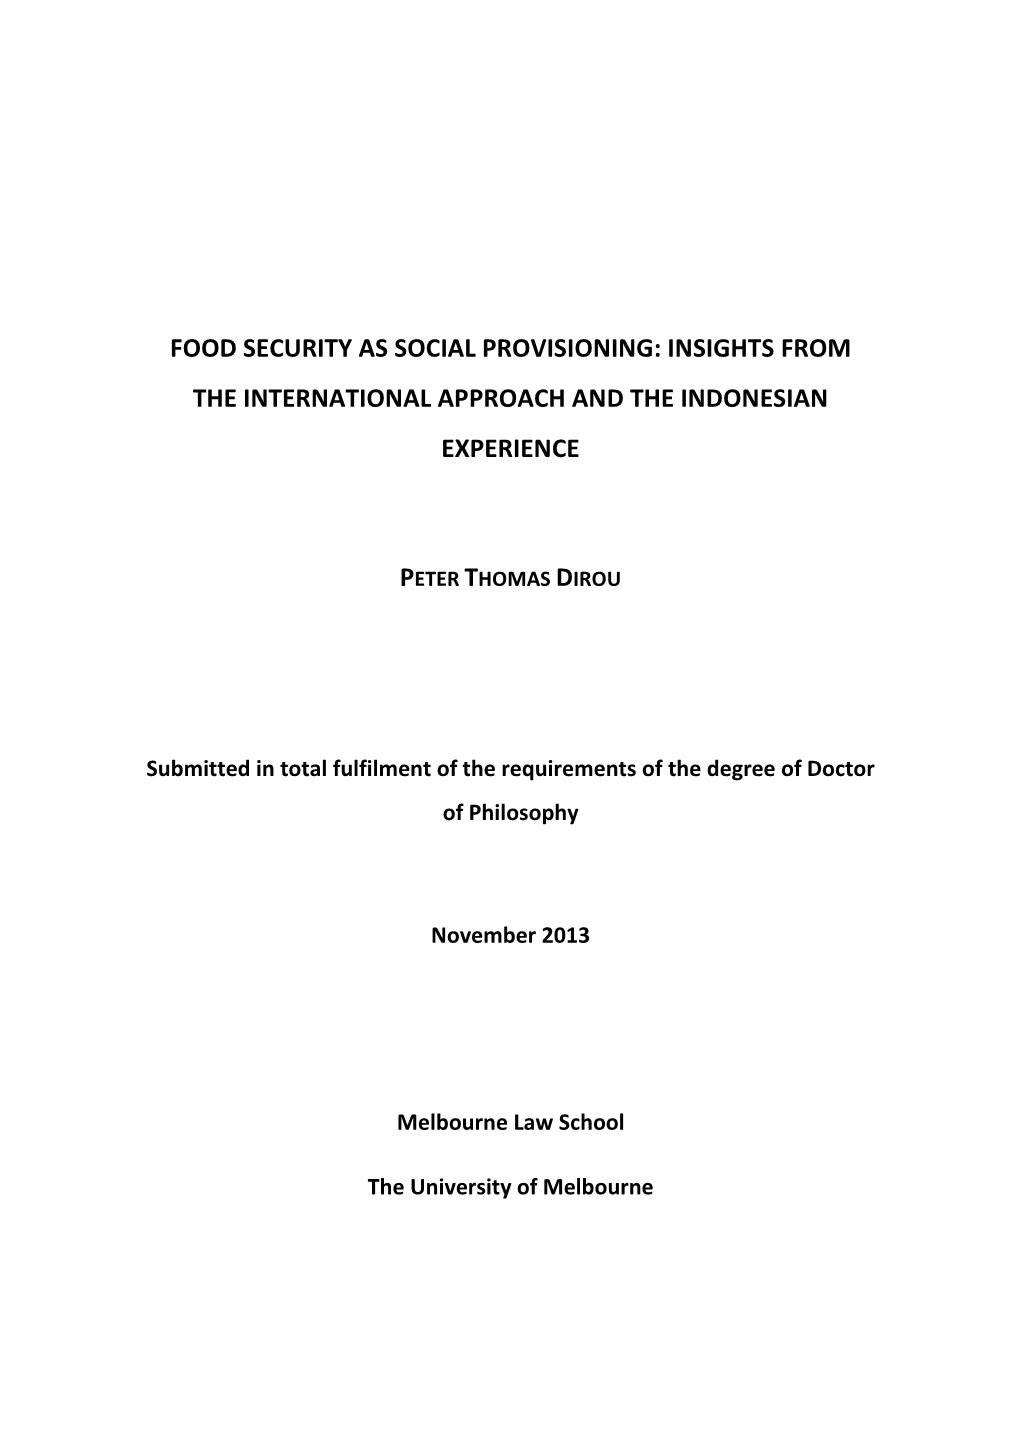 Food Security As Social Provisioning: Insights from the International Approach and the Indonesian Experience